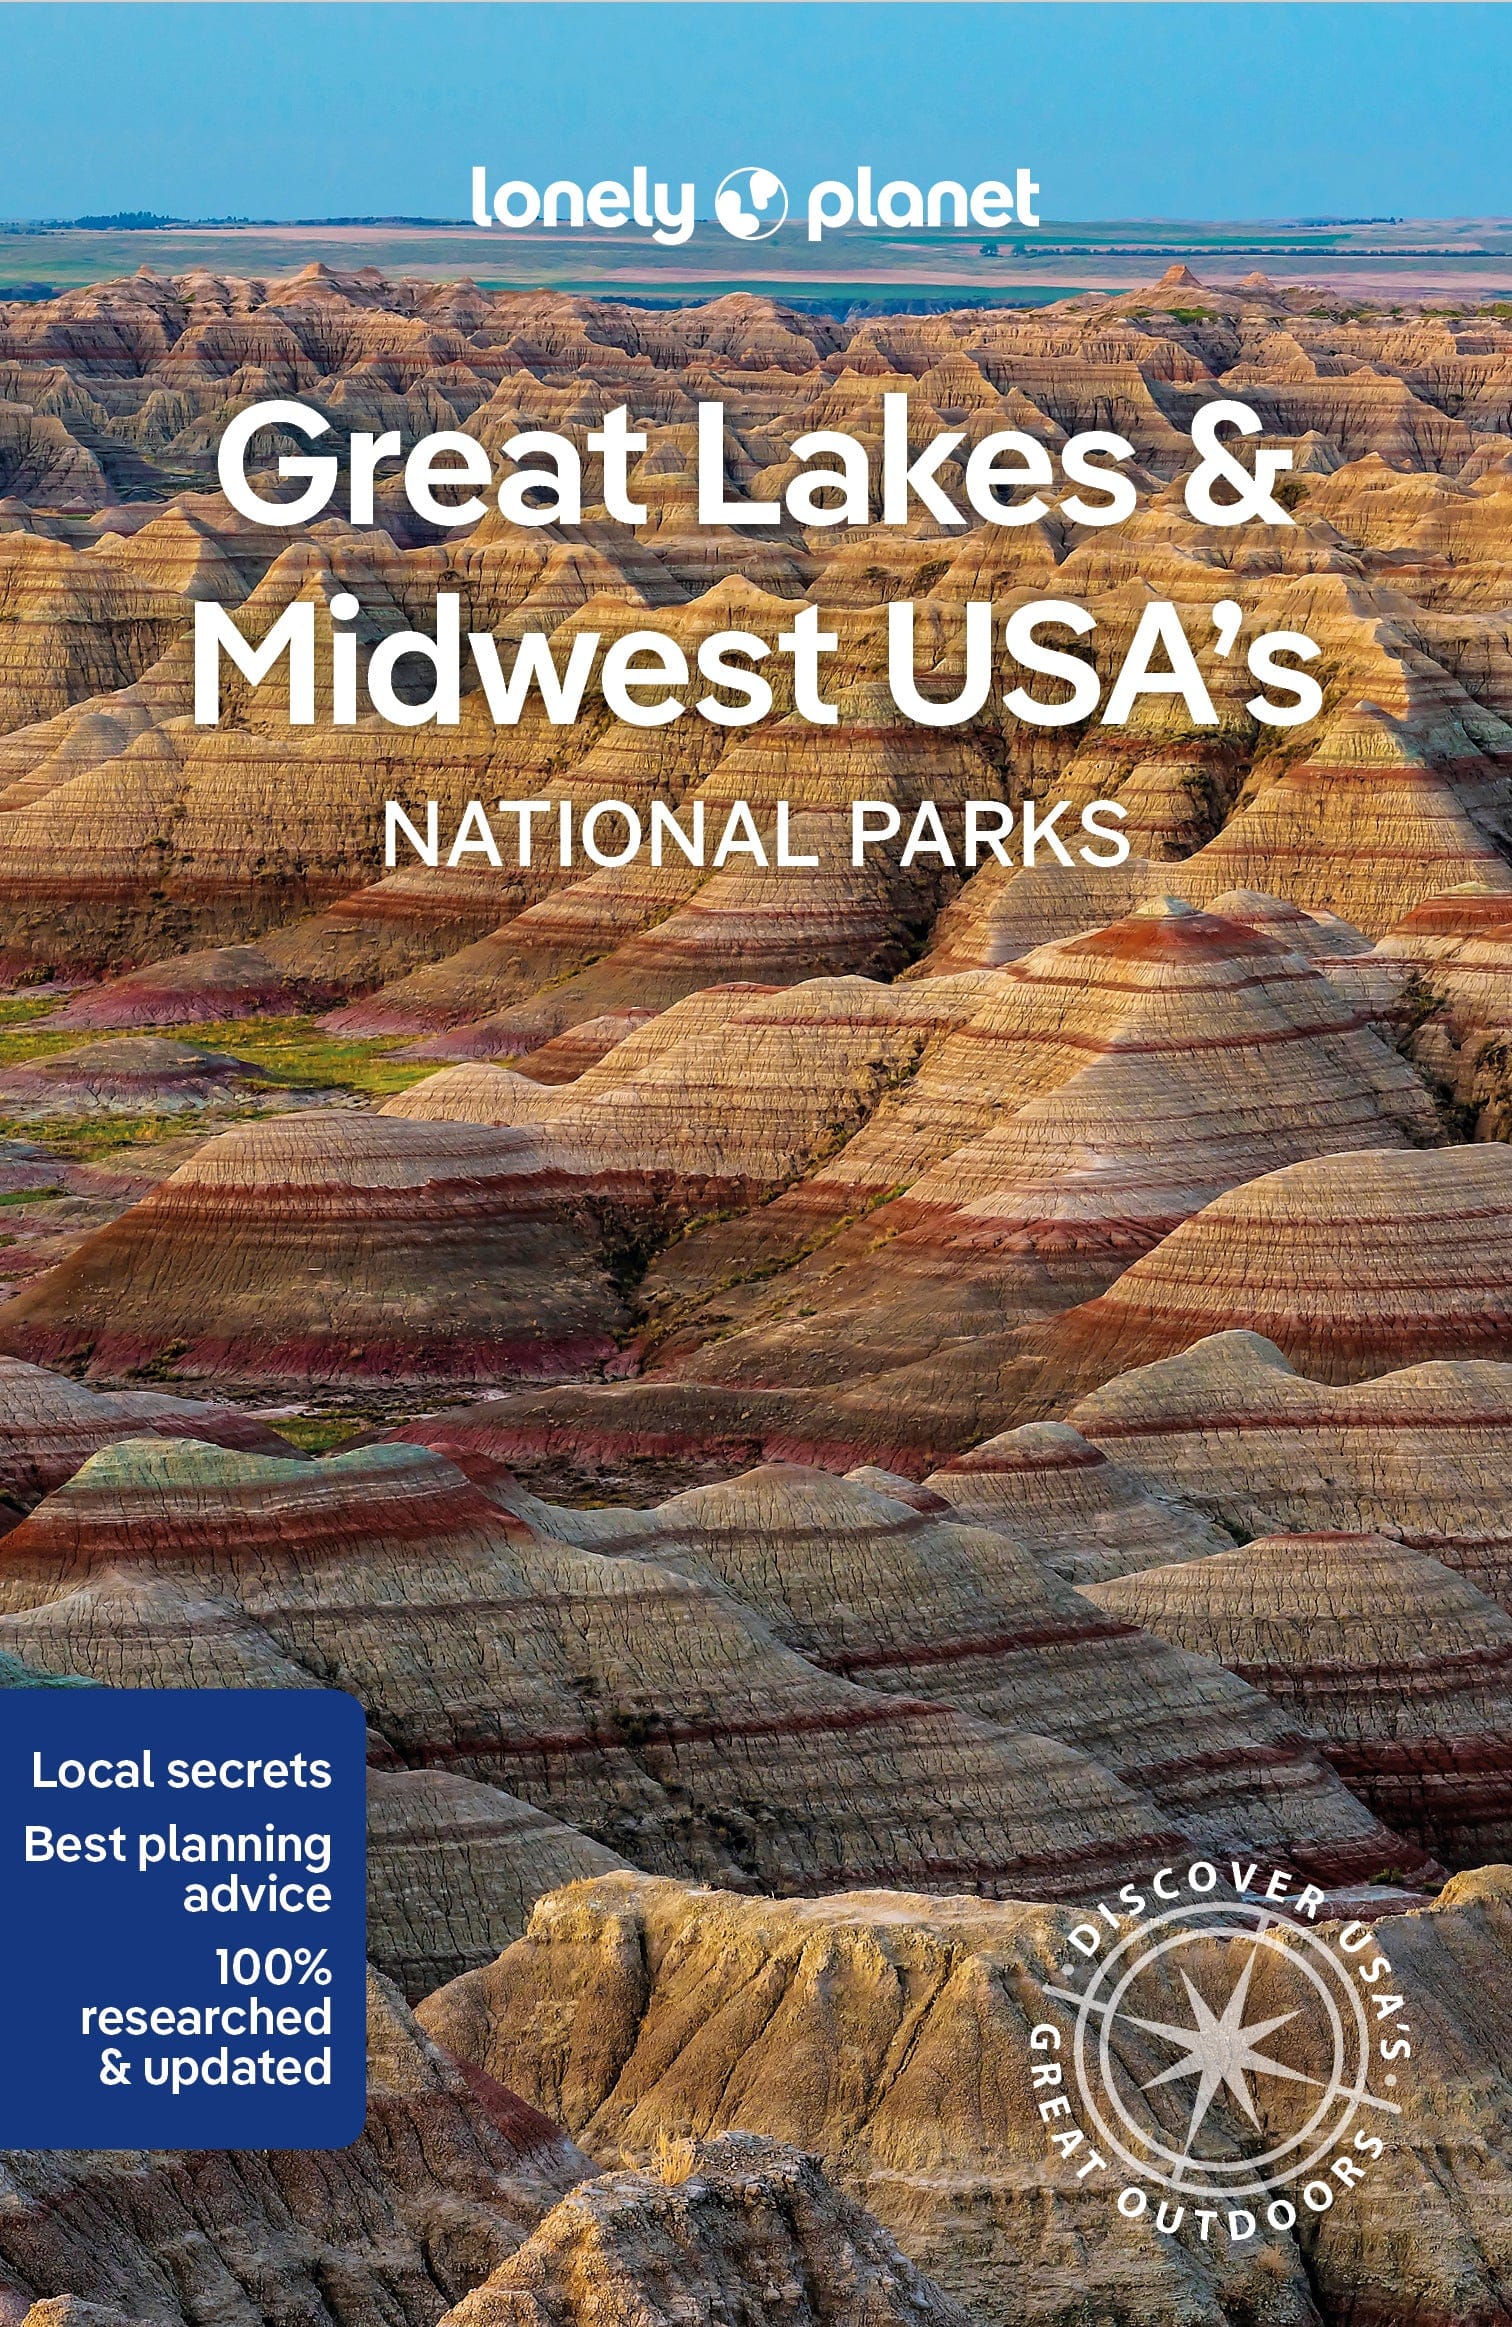 great-lakes-midwest-usa-national-parks-lonely-planet